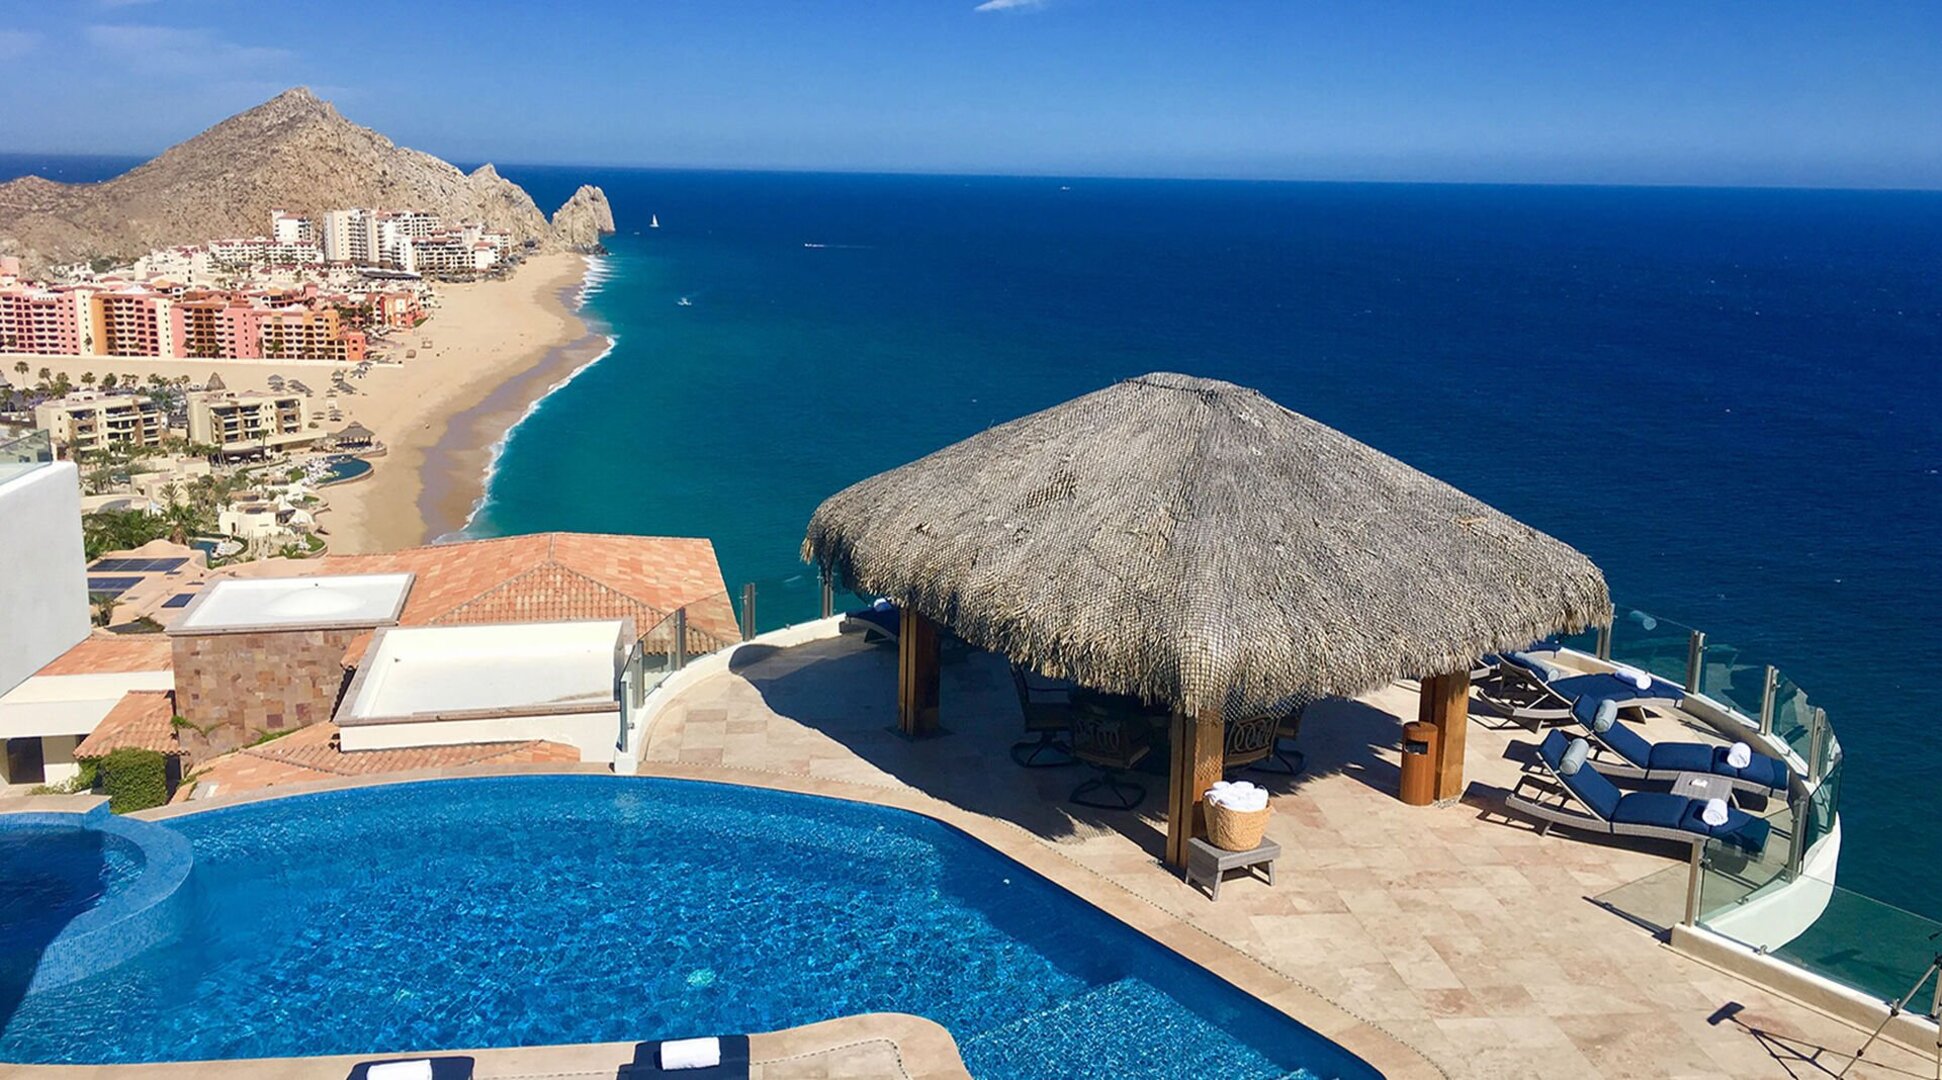 Property Image 2 - Beautiful Property Manager Holiday Villa in a Prime Location in Cabo San Lucas, Book Early to Secure Your 